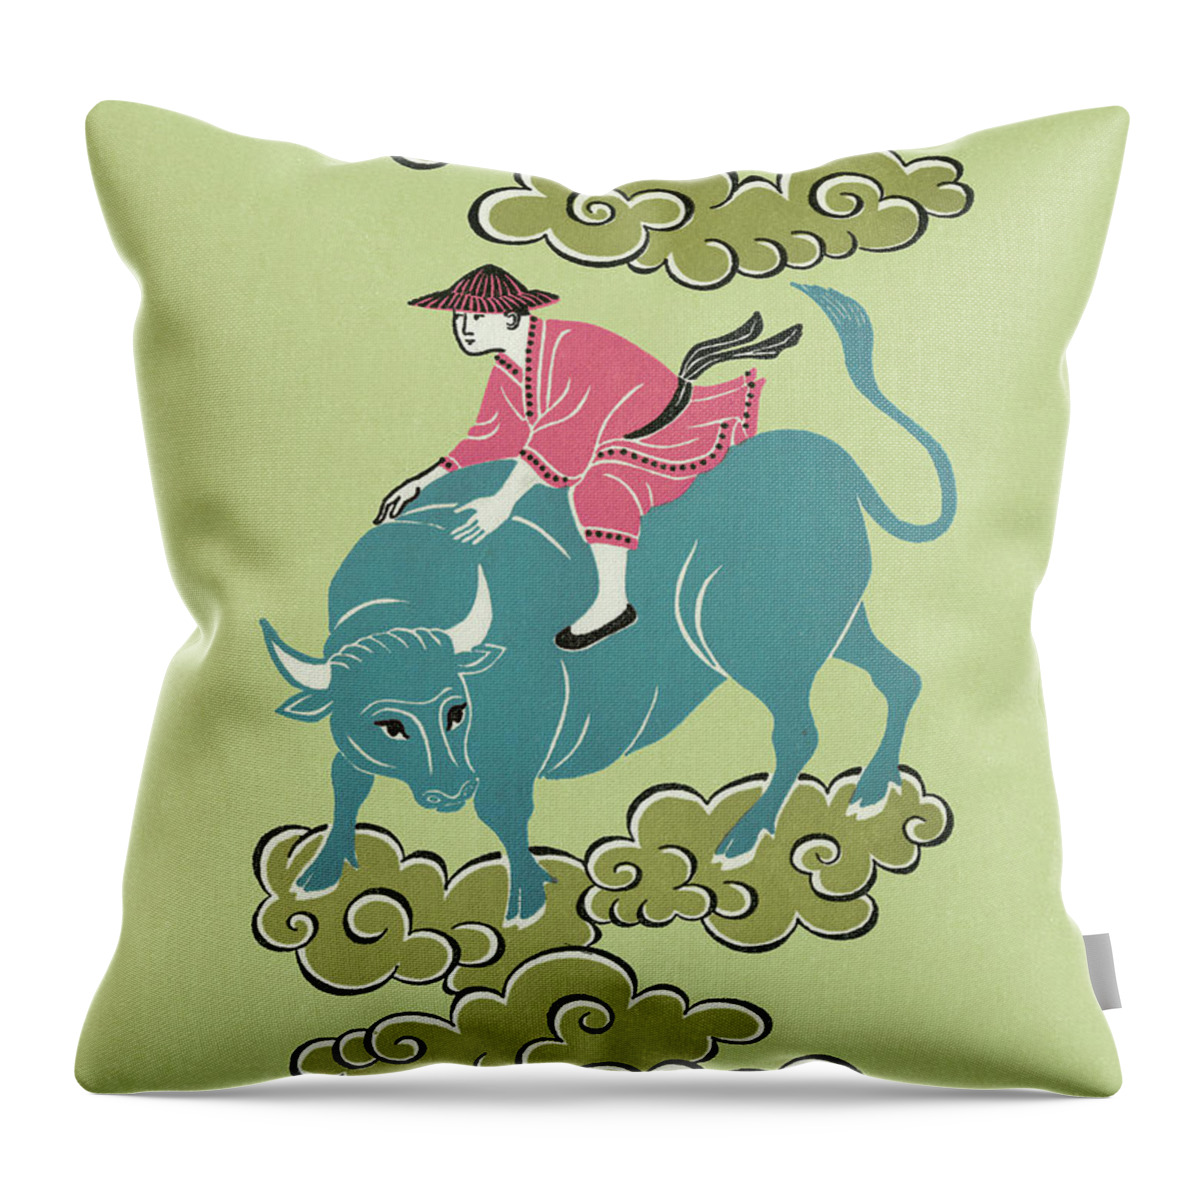 Adult Throw Pillow featuring the drawing Asian Man Riding Bull by CSA Images